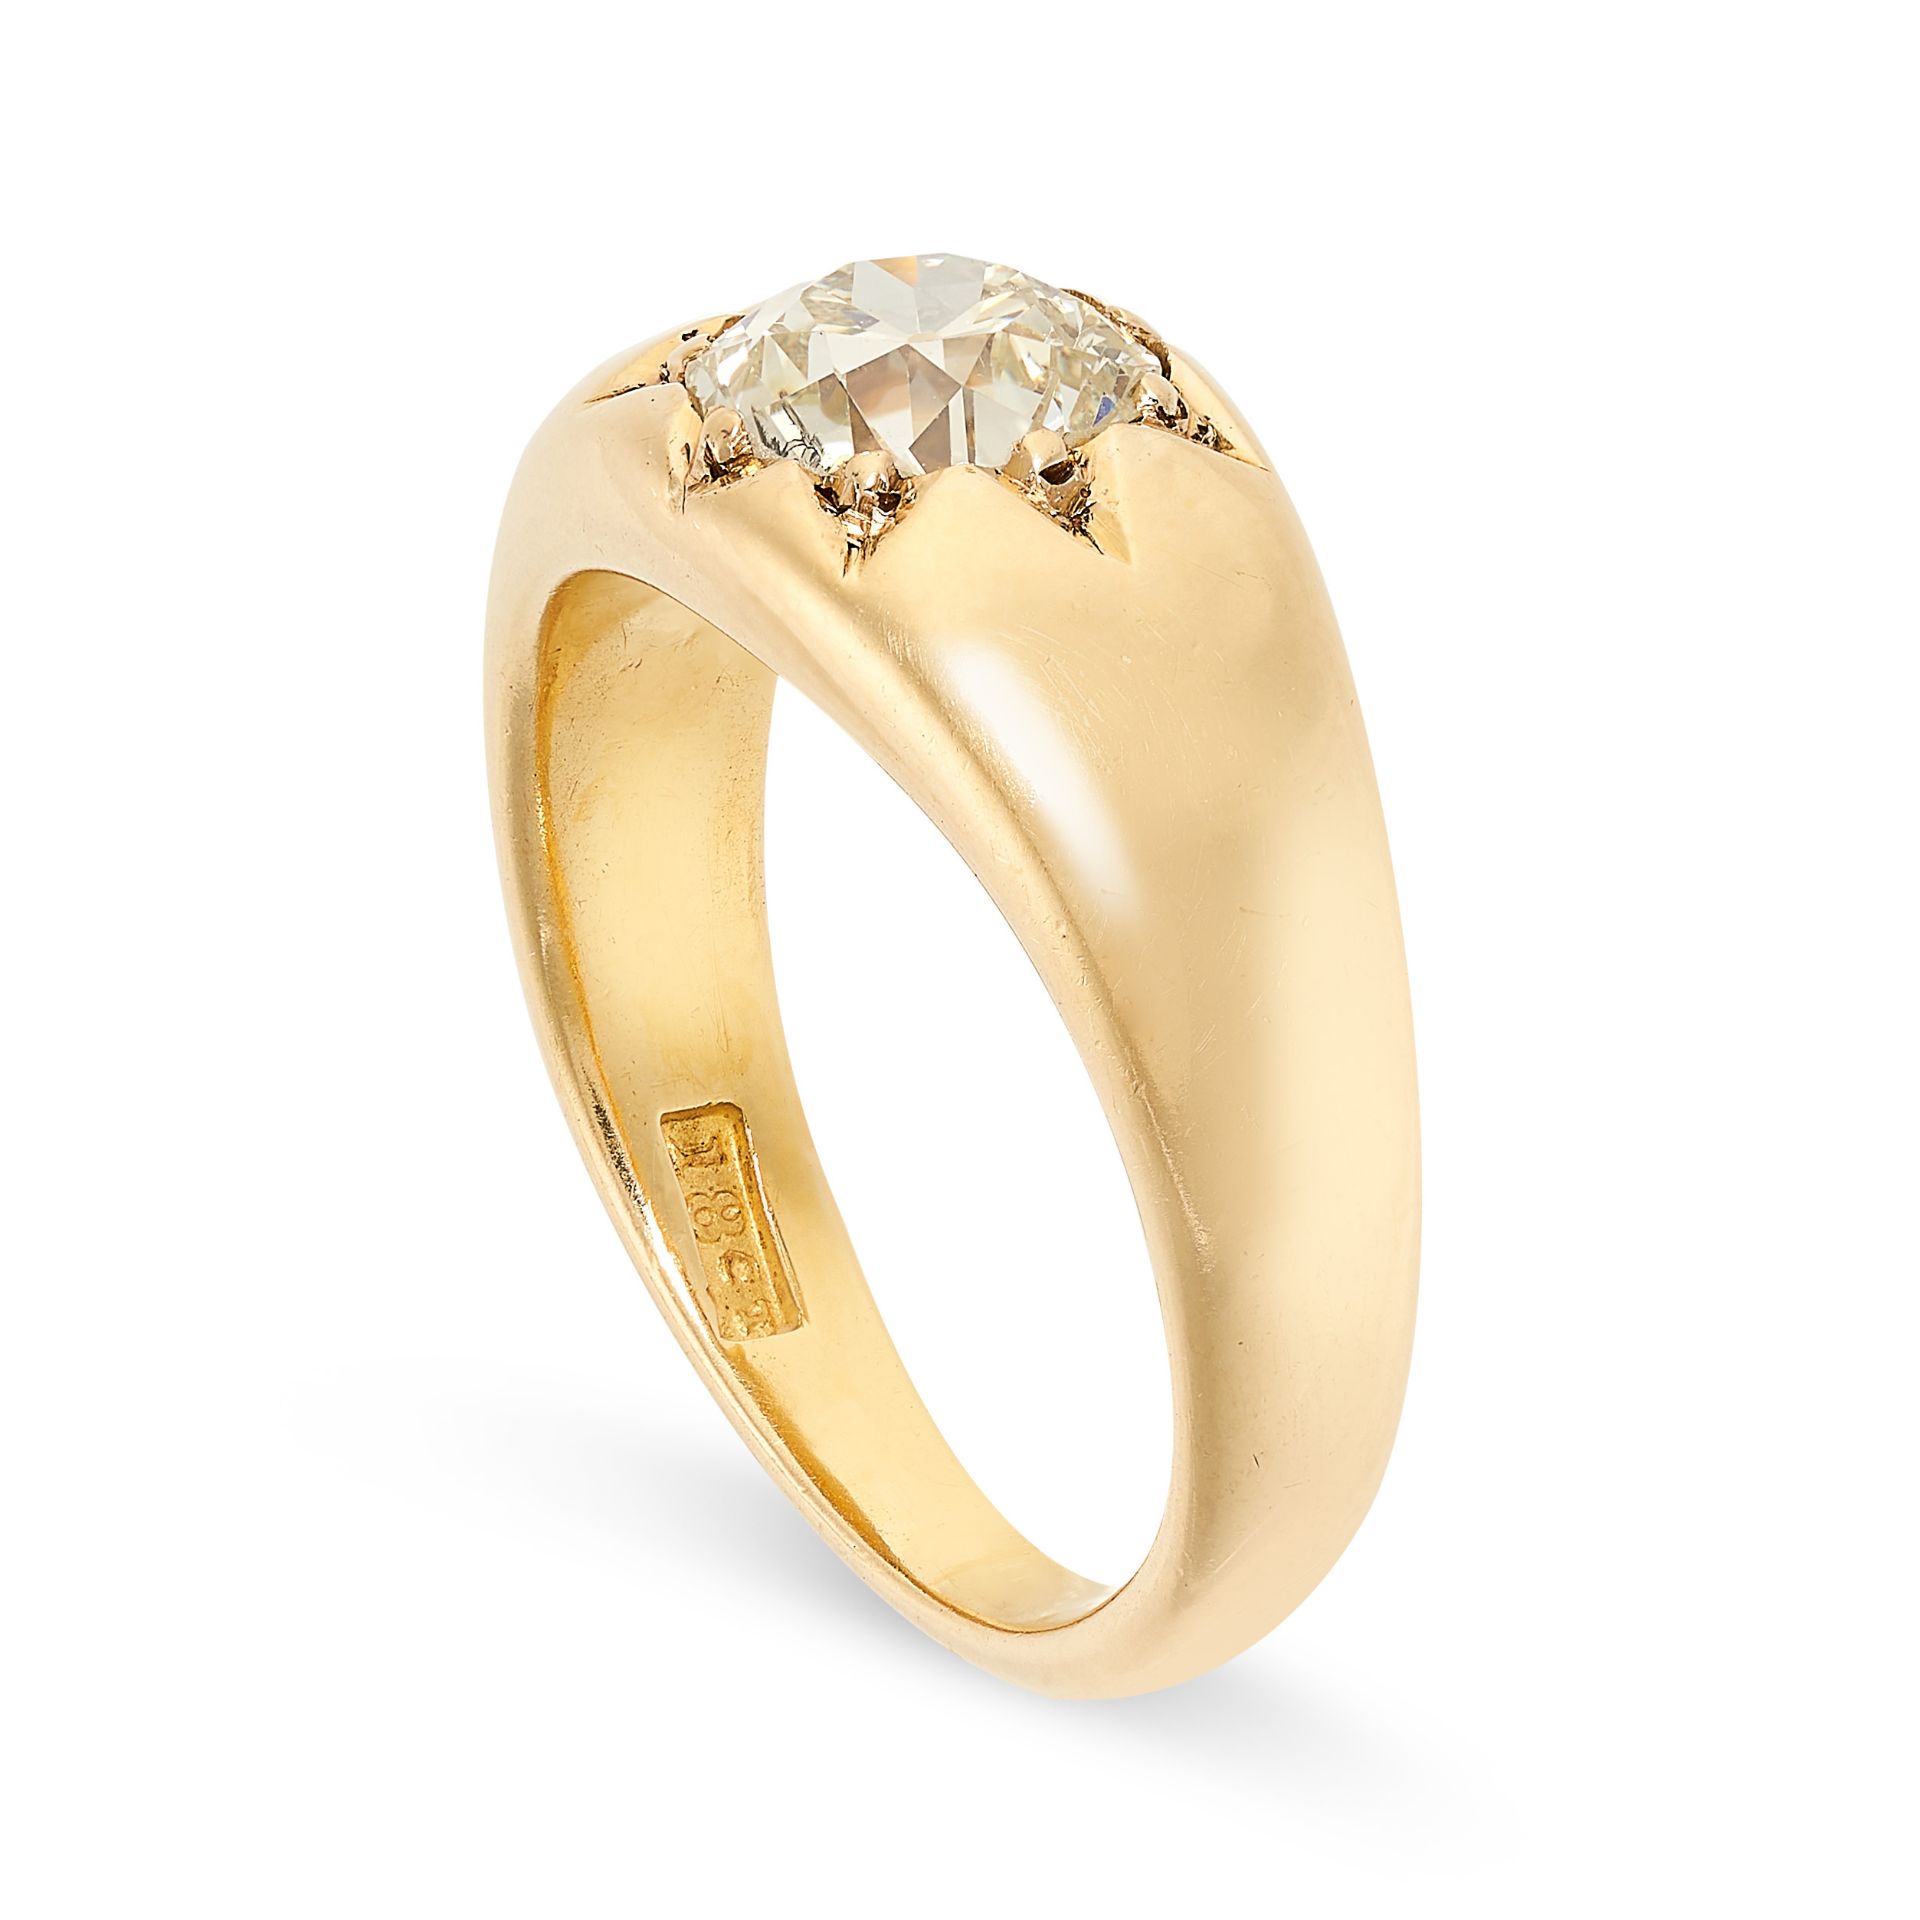 NO RESERVE - A DIAMOND GYPSY RING in 18ct yellow gold, set with an old cut diamond of - Image 2 of 2